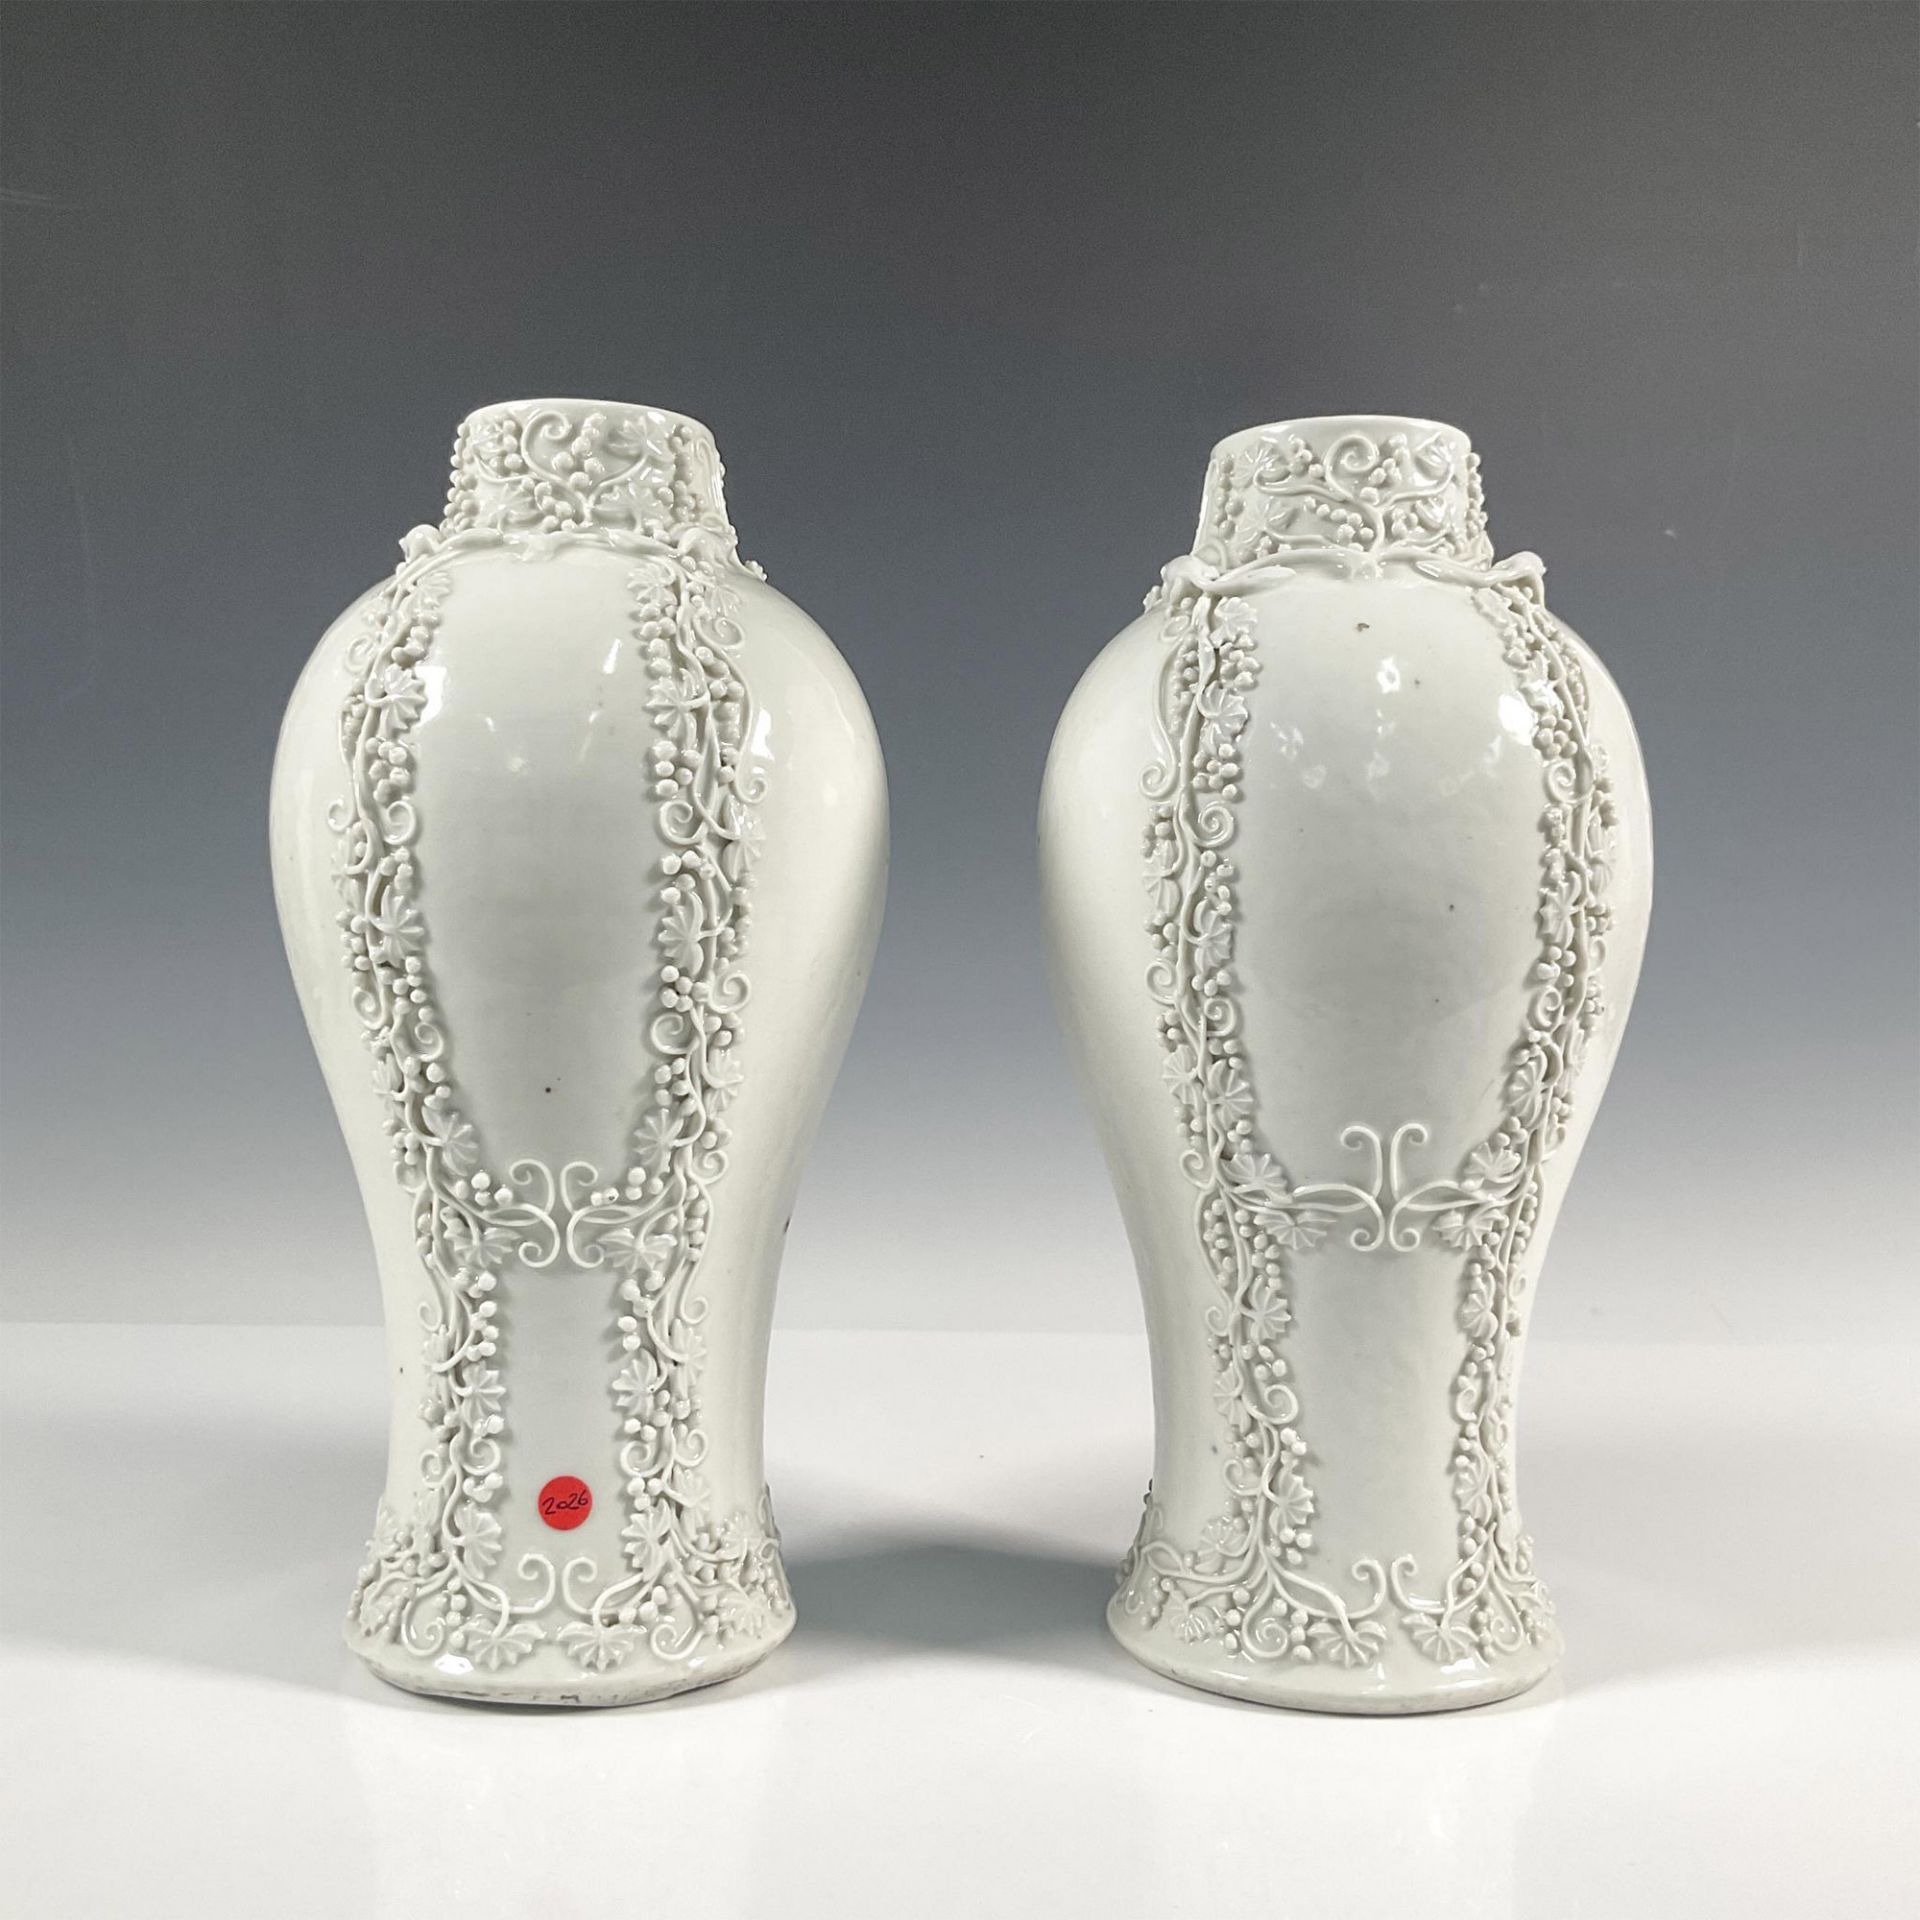 Pair of Chinese Dehua Porcelain Meiping Vases - Image 2 of 4